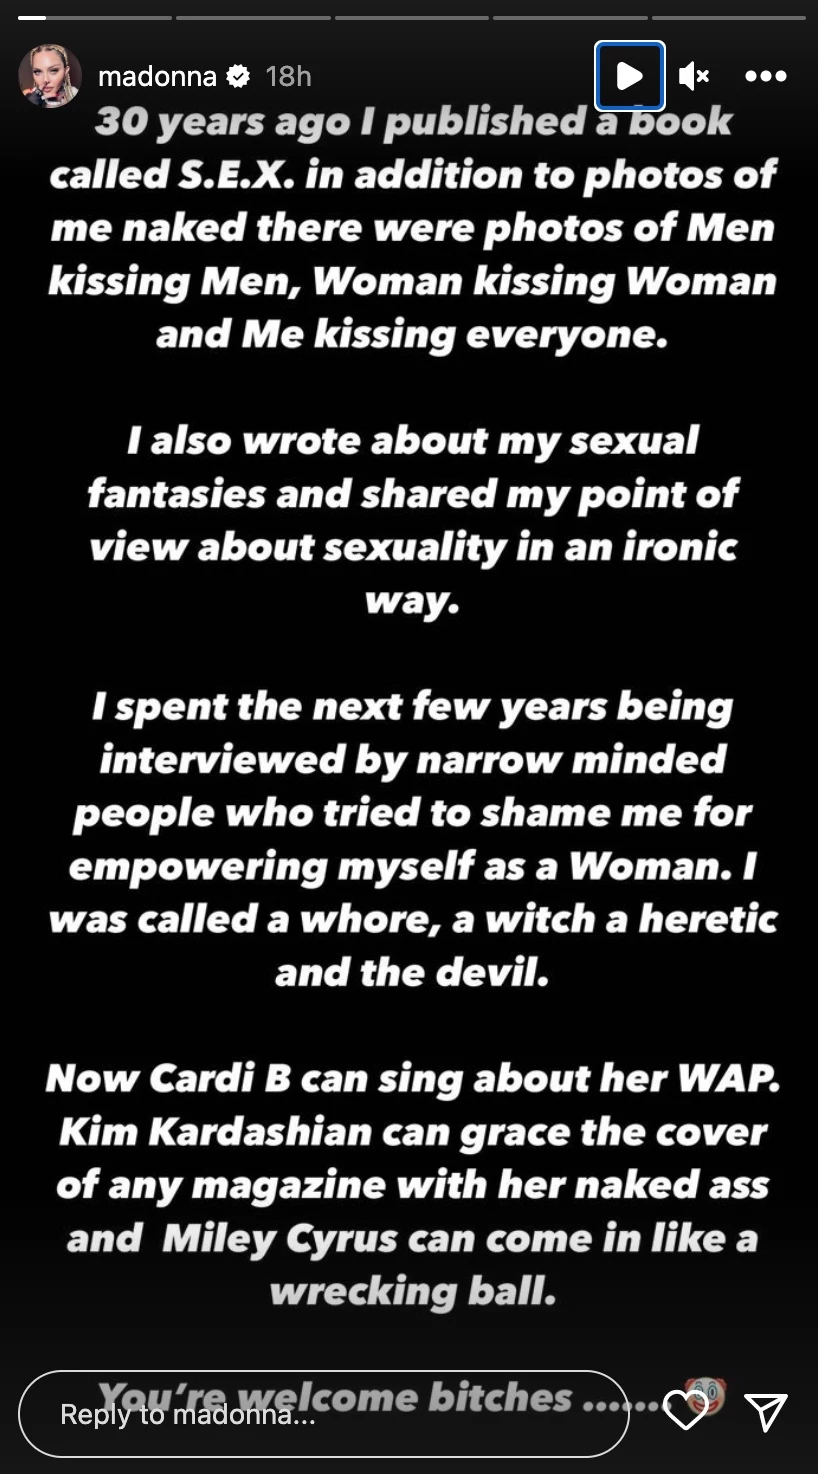 Cardi B Fires Back at Madonna Following Madonnas Sex Book Post photo picture